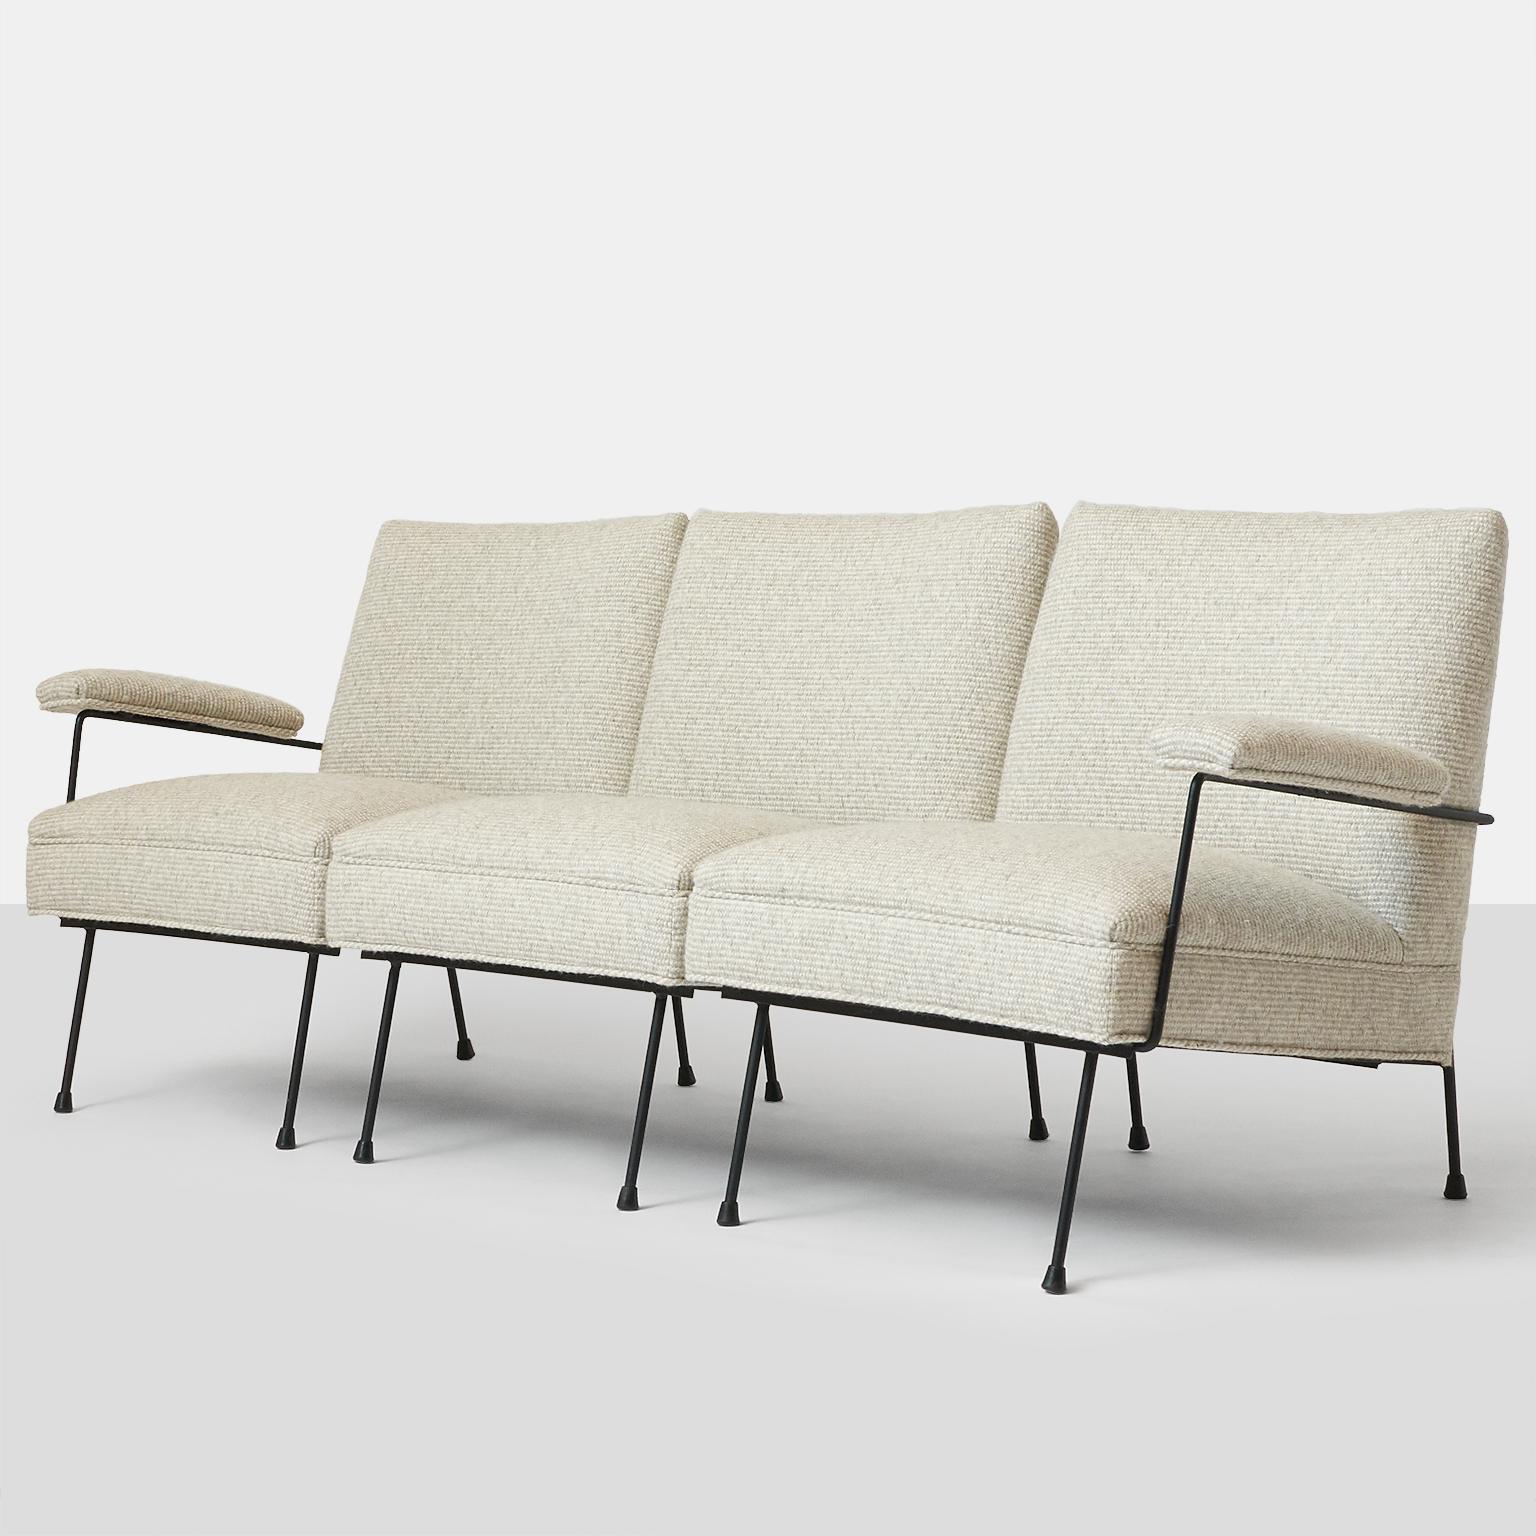 A rare three-piece sectional by Milo Baughman for Pacific Iron Products. The sectional consists of one armless chair and two-one arm chairs. Completely restored in a pebble colored Sandra Jordan Alpaca.